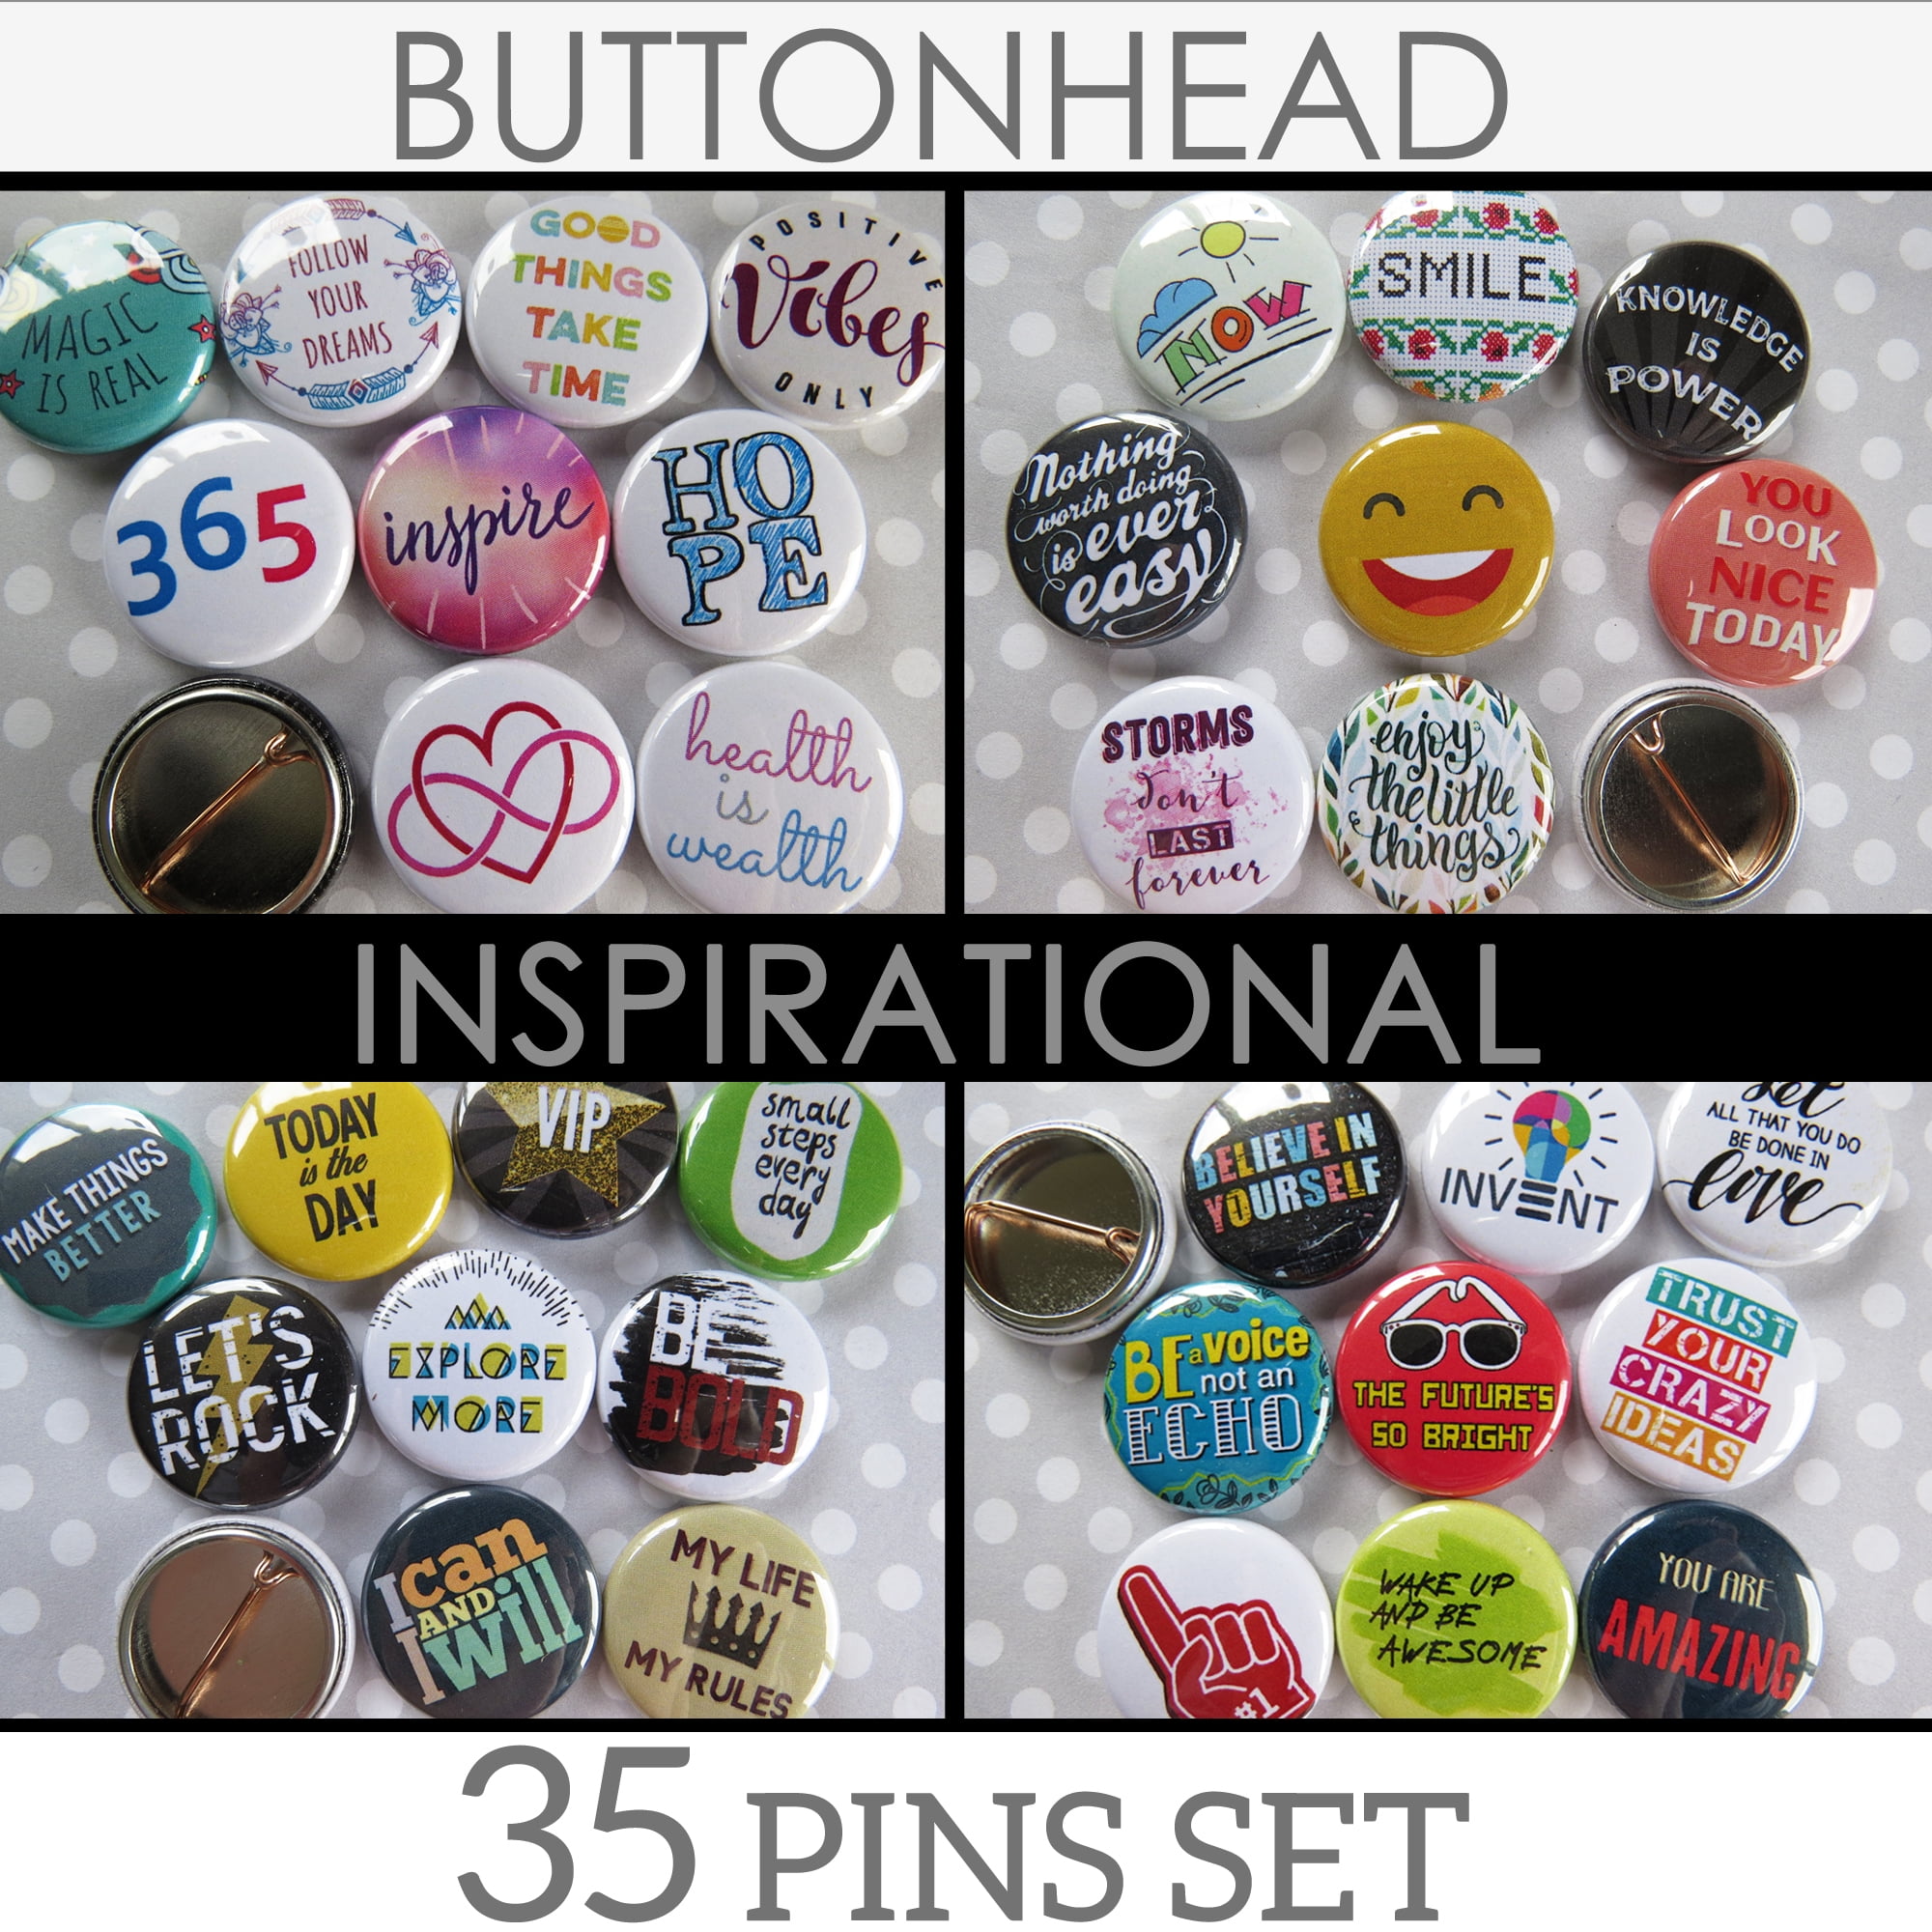 School Buttons Pins Set Backpack Pins Gift for Teachers Students Classroom Rewards, Size: Small